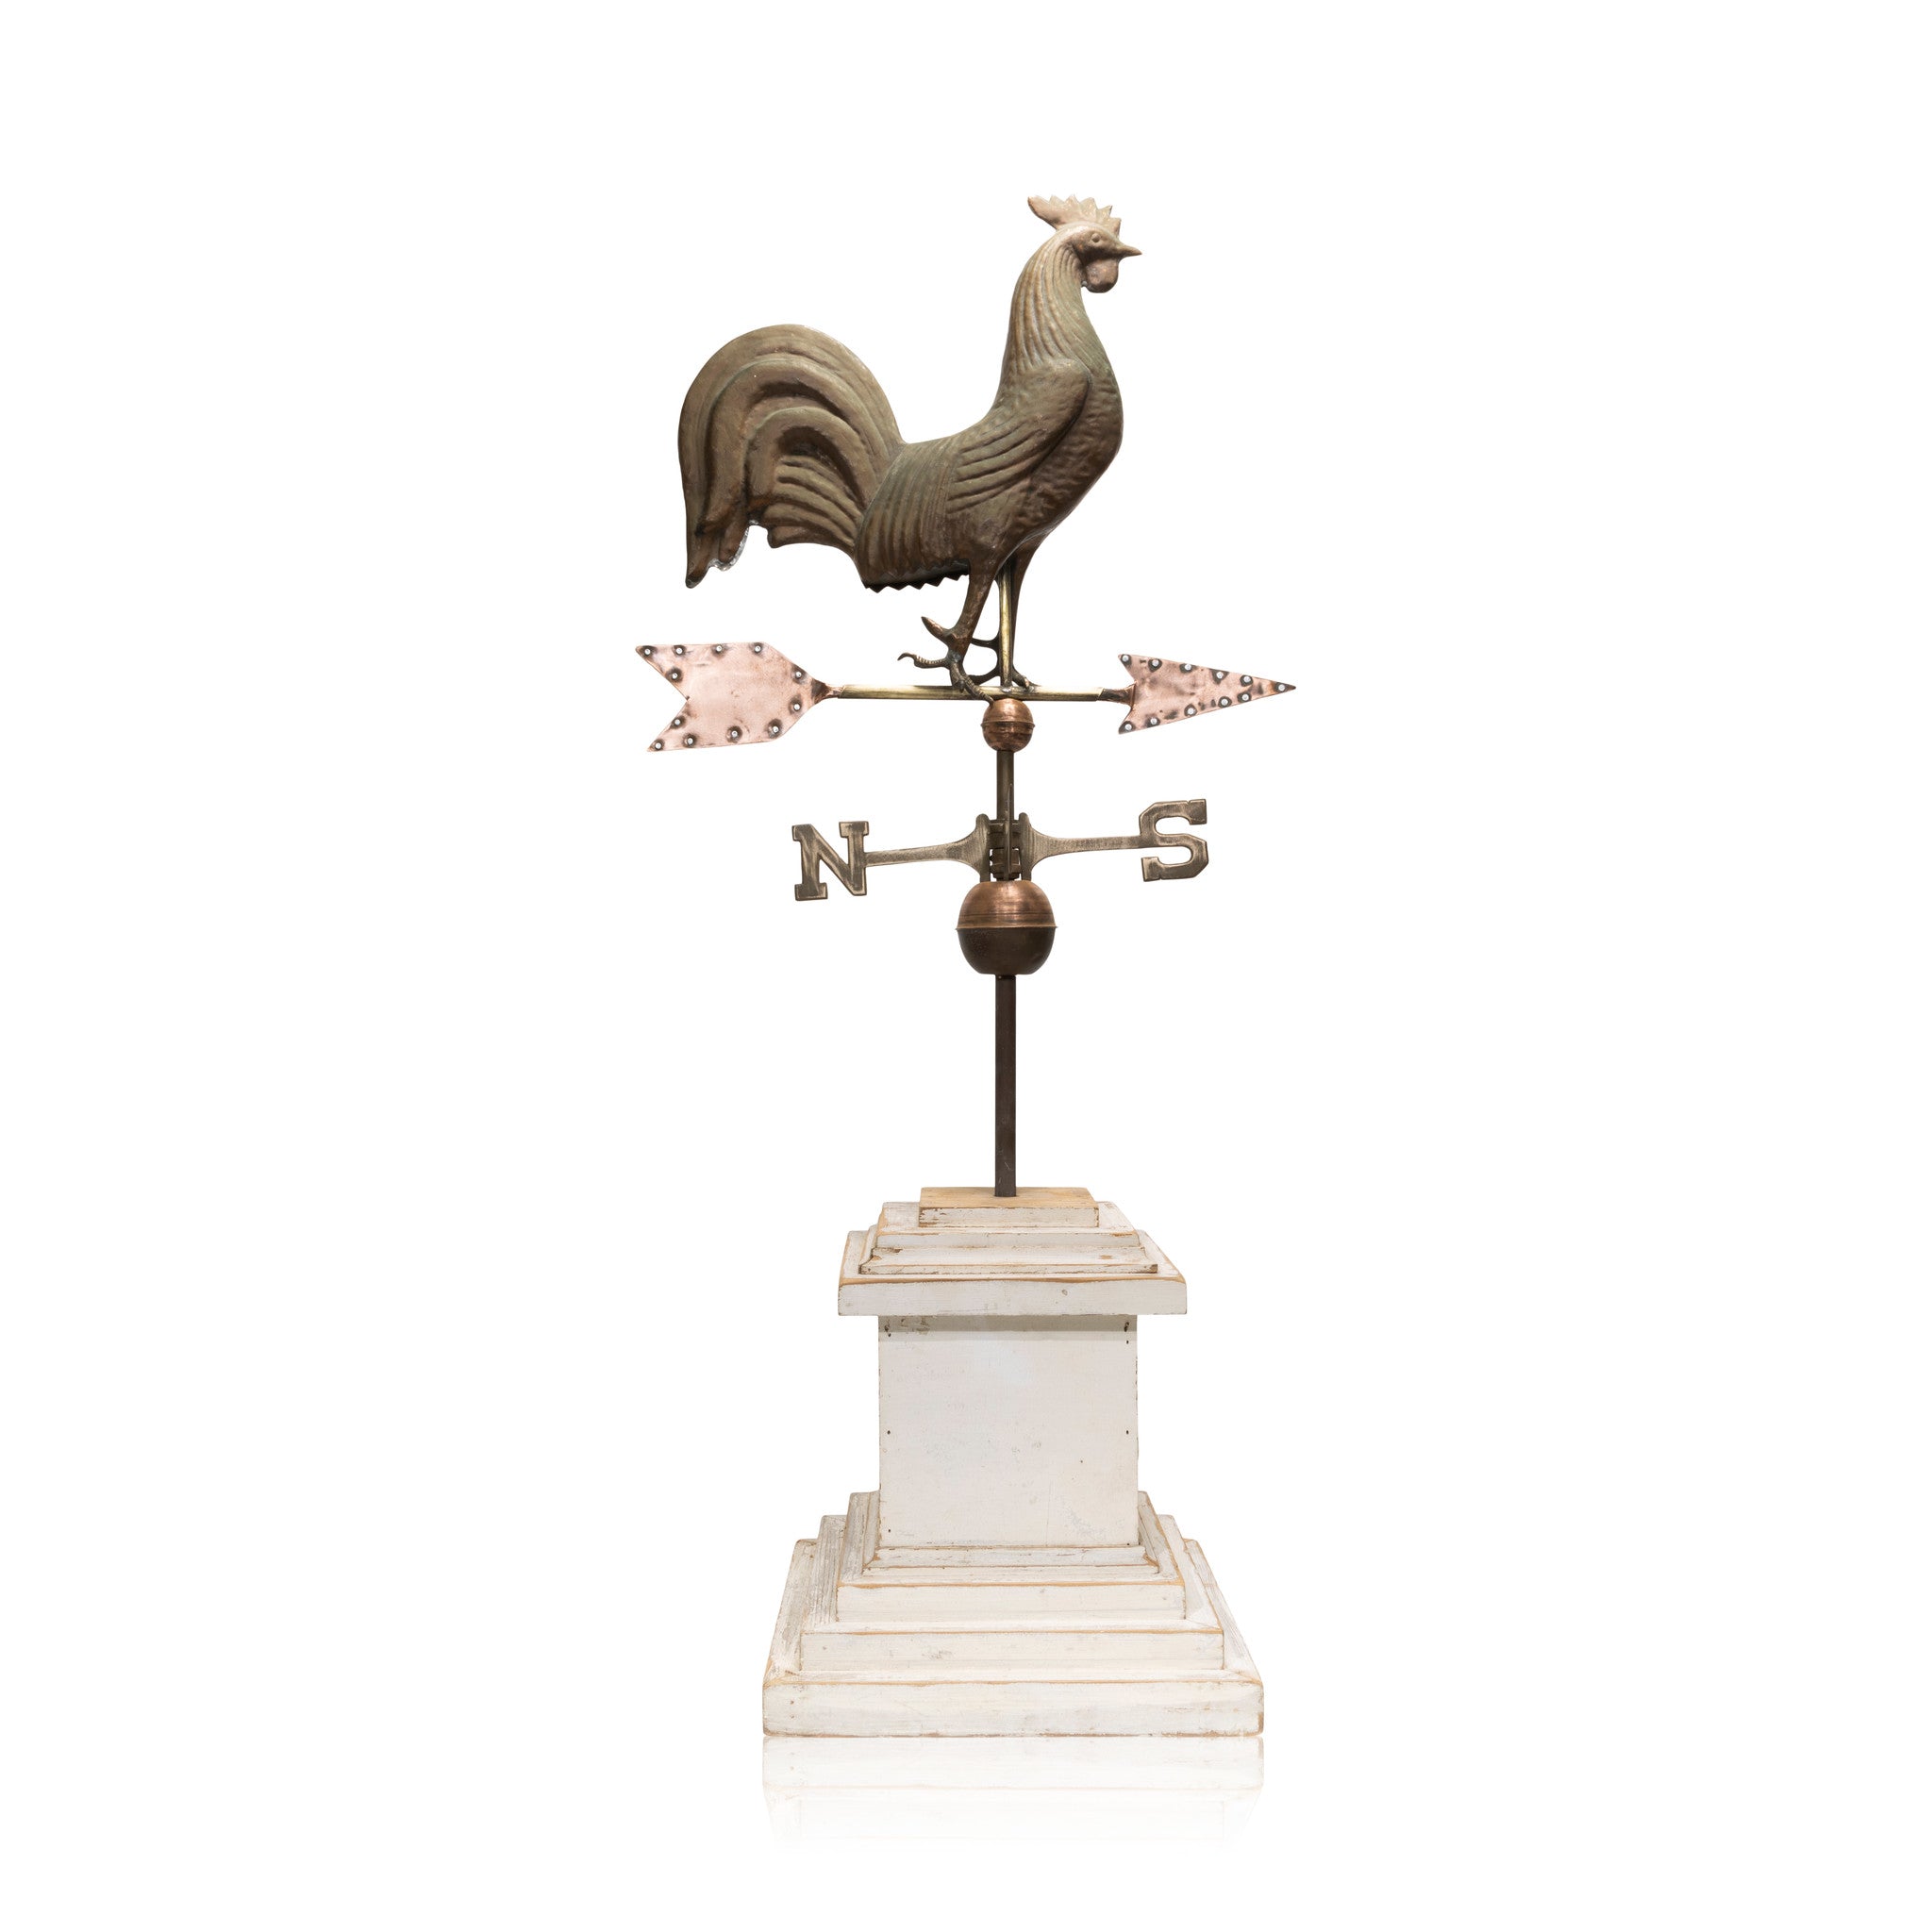 Copper Rooster Weather Vane, Furnishings, Decor, Weather Vane